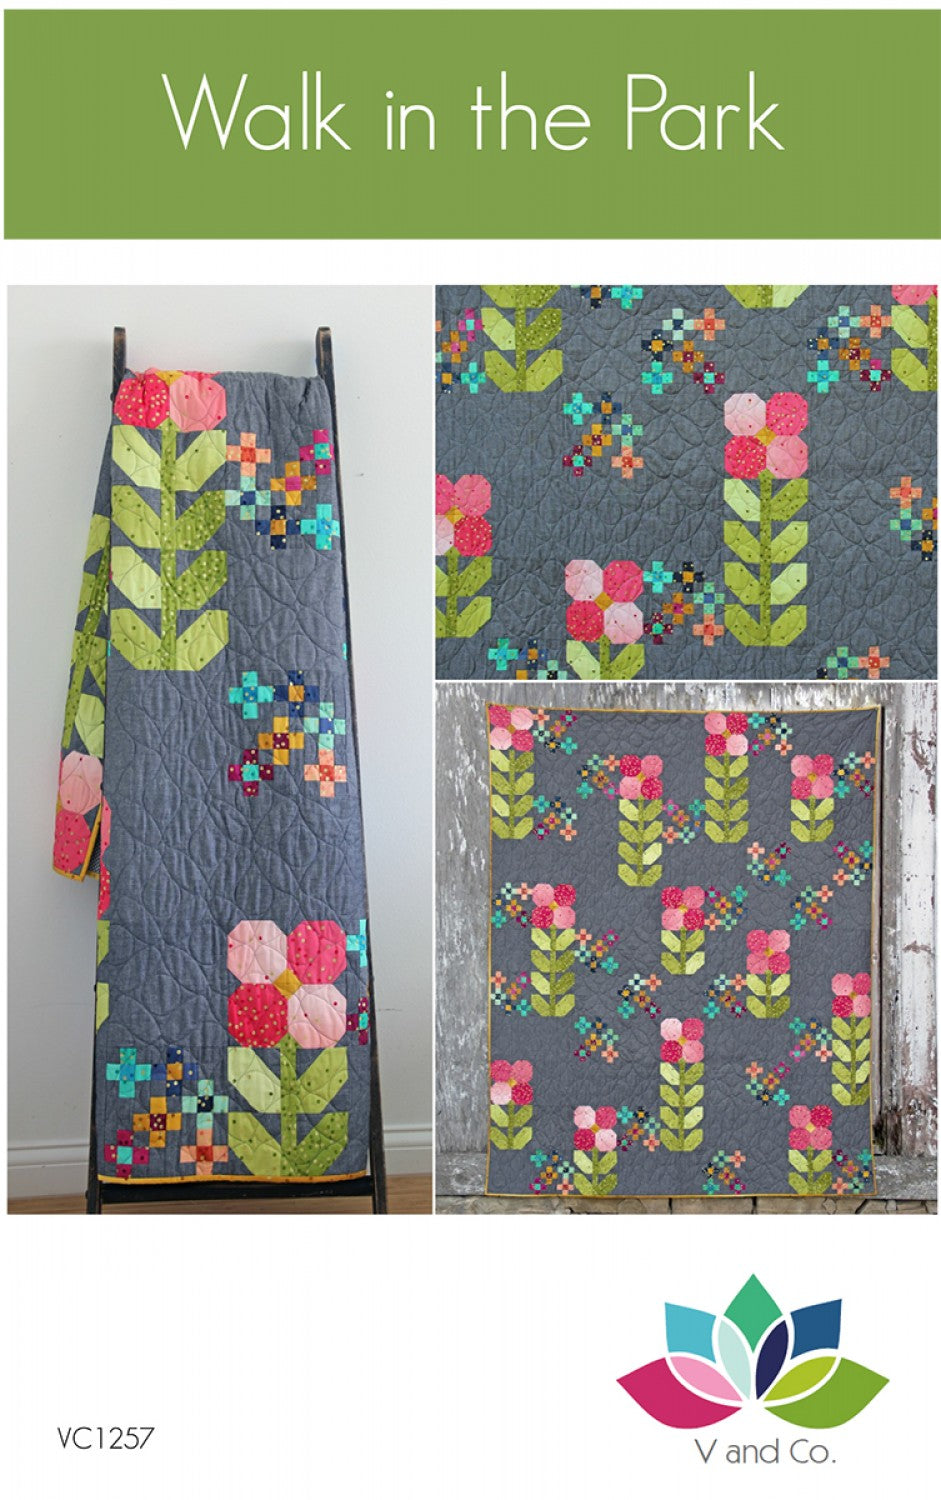 Walk in the Park by V & Co. + Quilt Kit